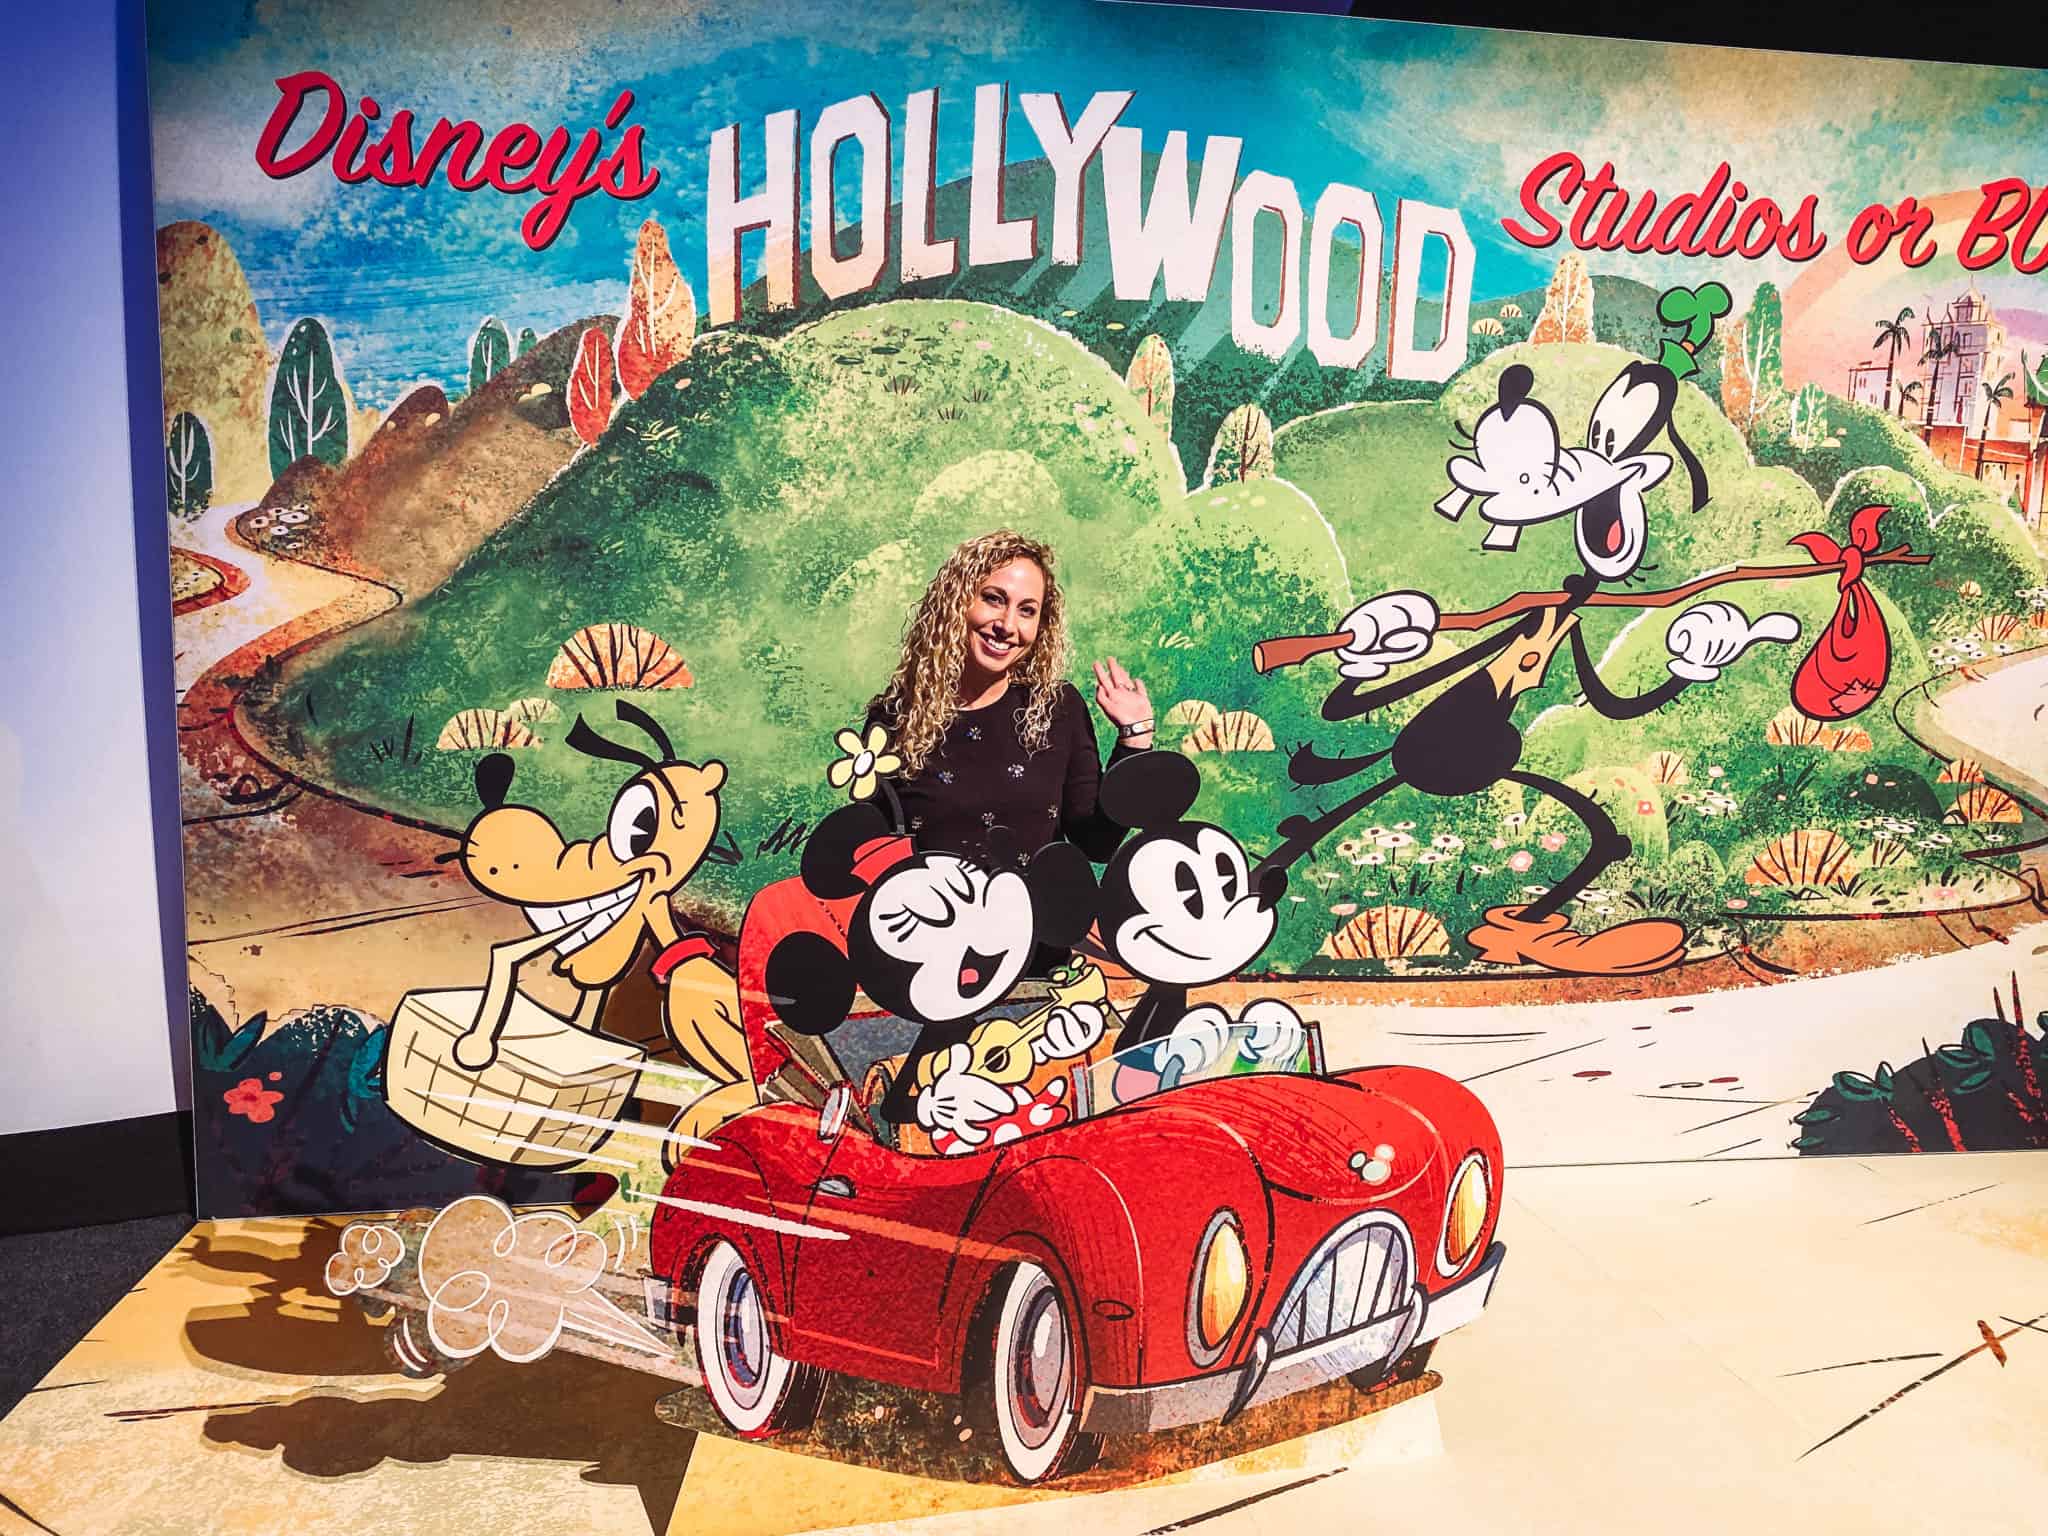 Mickey and Minnie’s Runaway Railway opens at Disney’s Hollywood Studios at Walt Disney Resort on March 4. We interviewed Disney Imagineer Charita Carter to get as many details as we could.